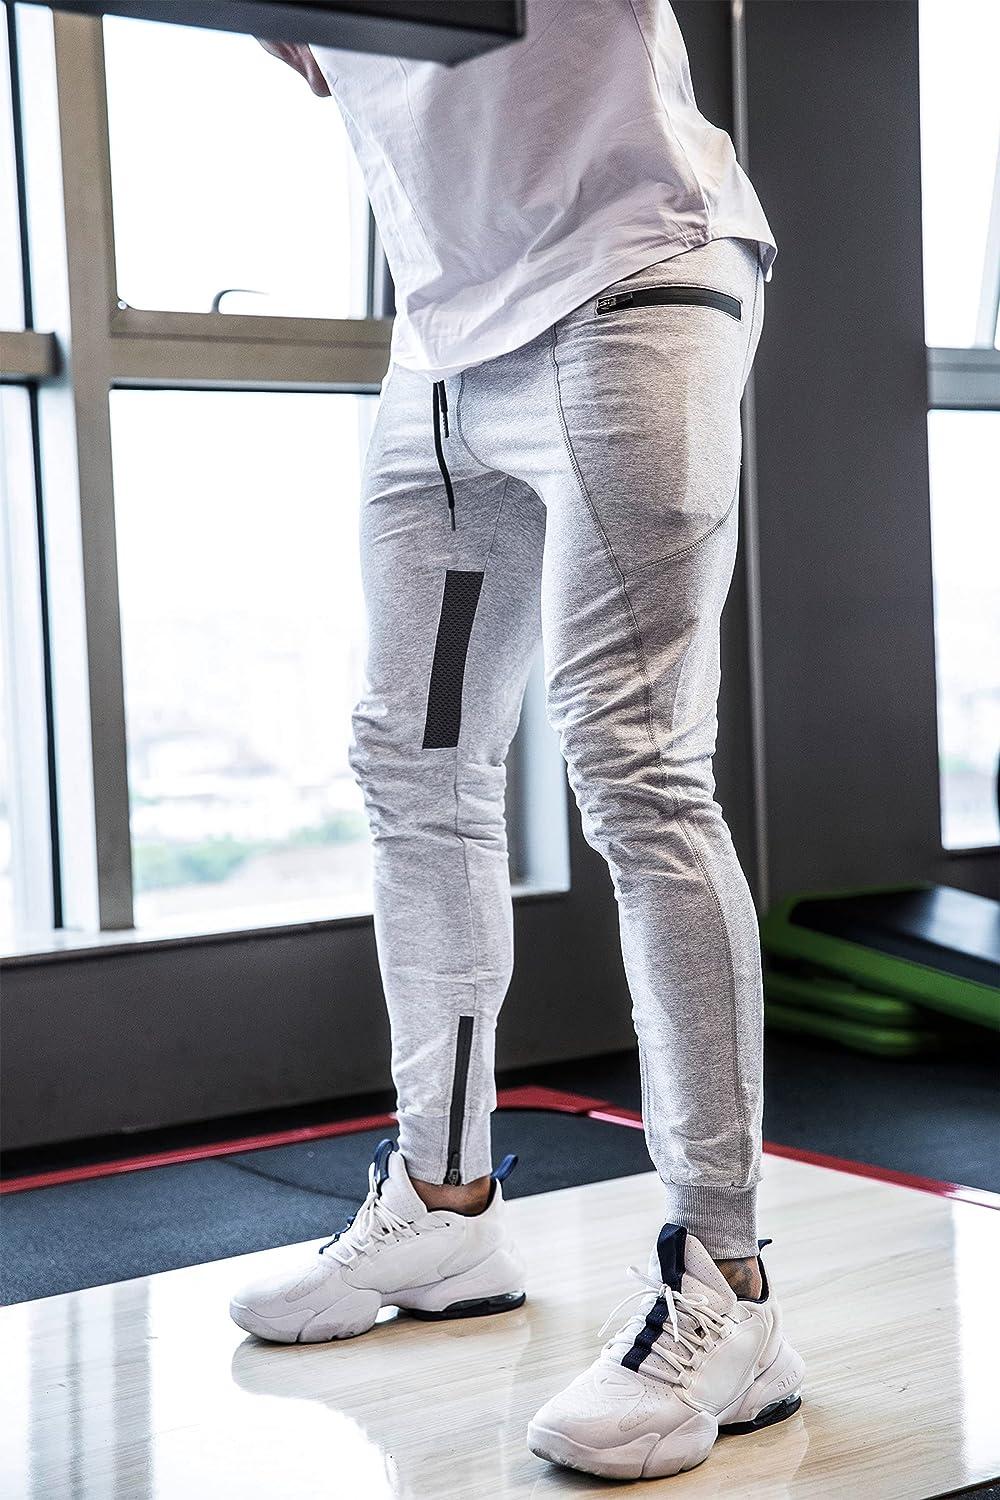 FIRSTGYM Mens Joggers Sweatpants Slim Fit Workout Training Thigh